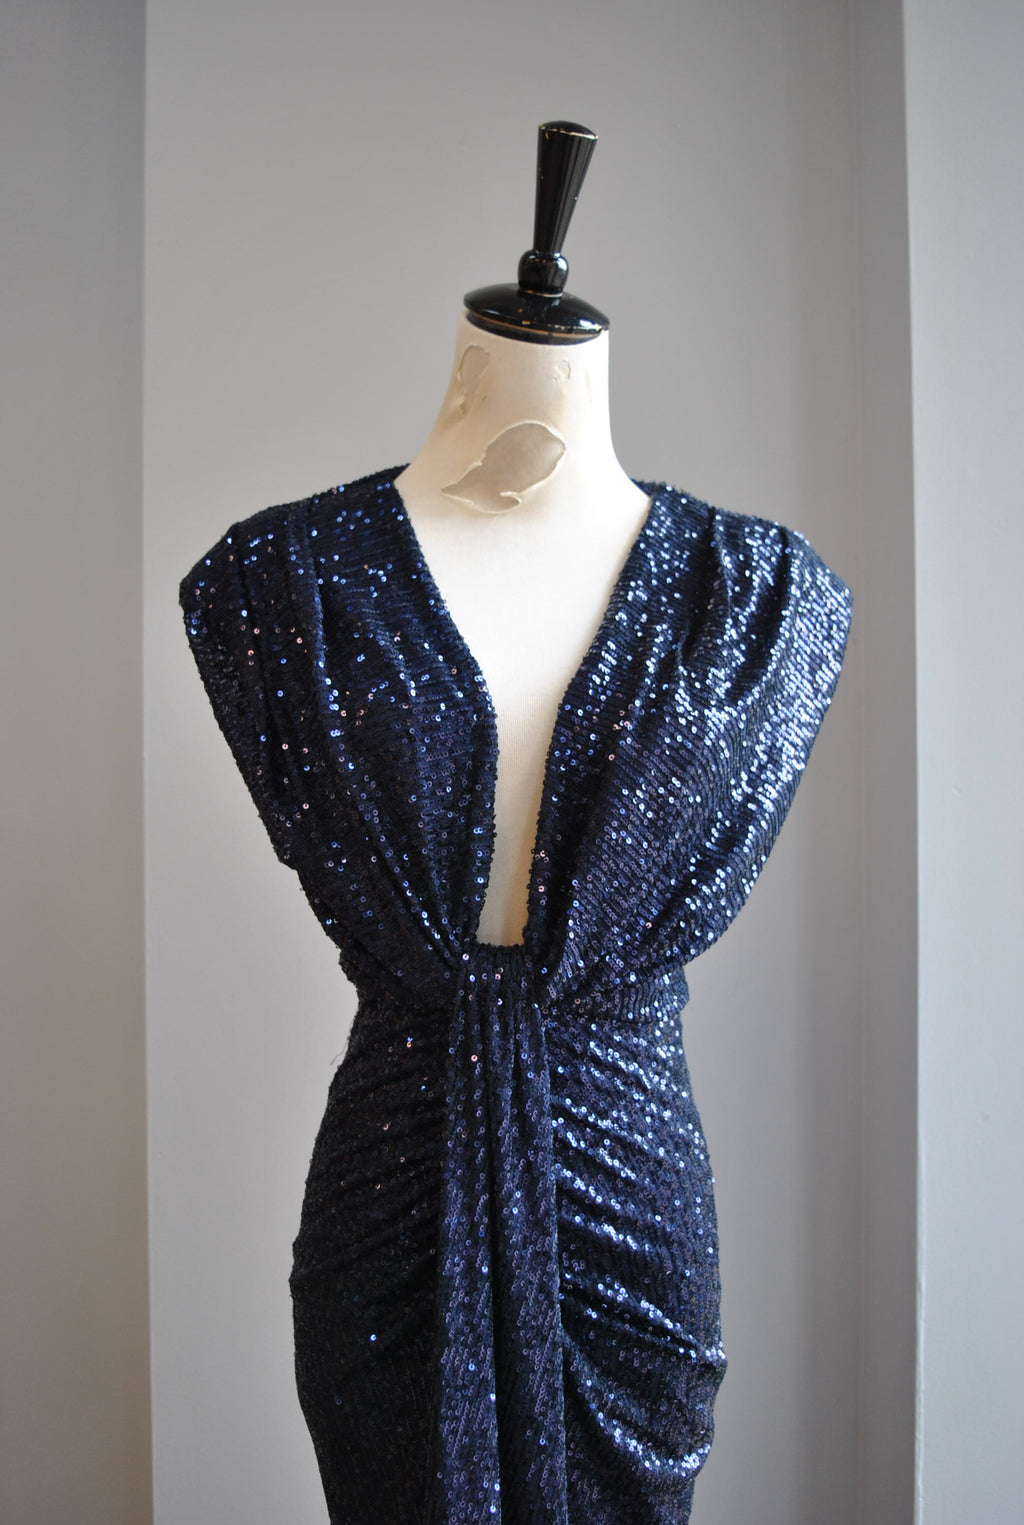 NAVY BLUE SEQUIN MIDI DRESS WITH FRONT RUSHING